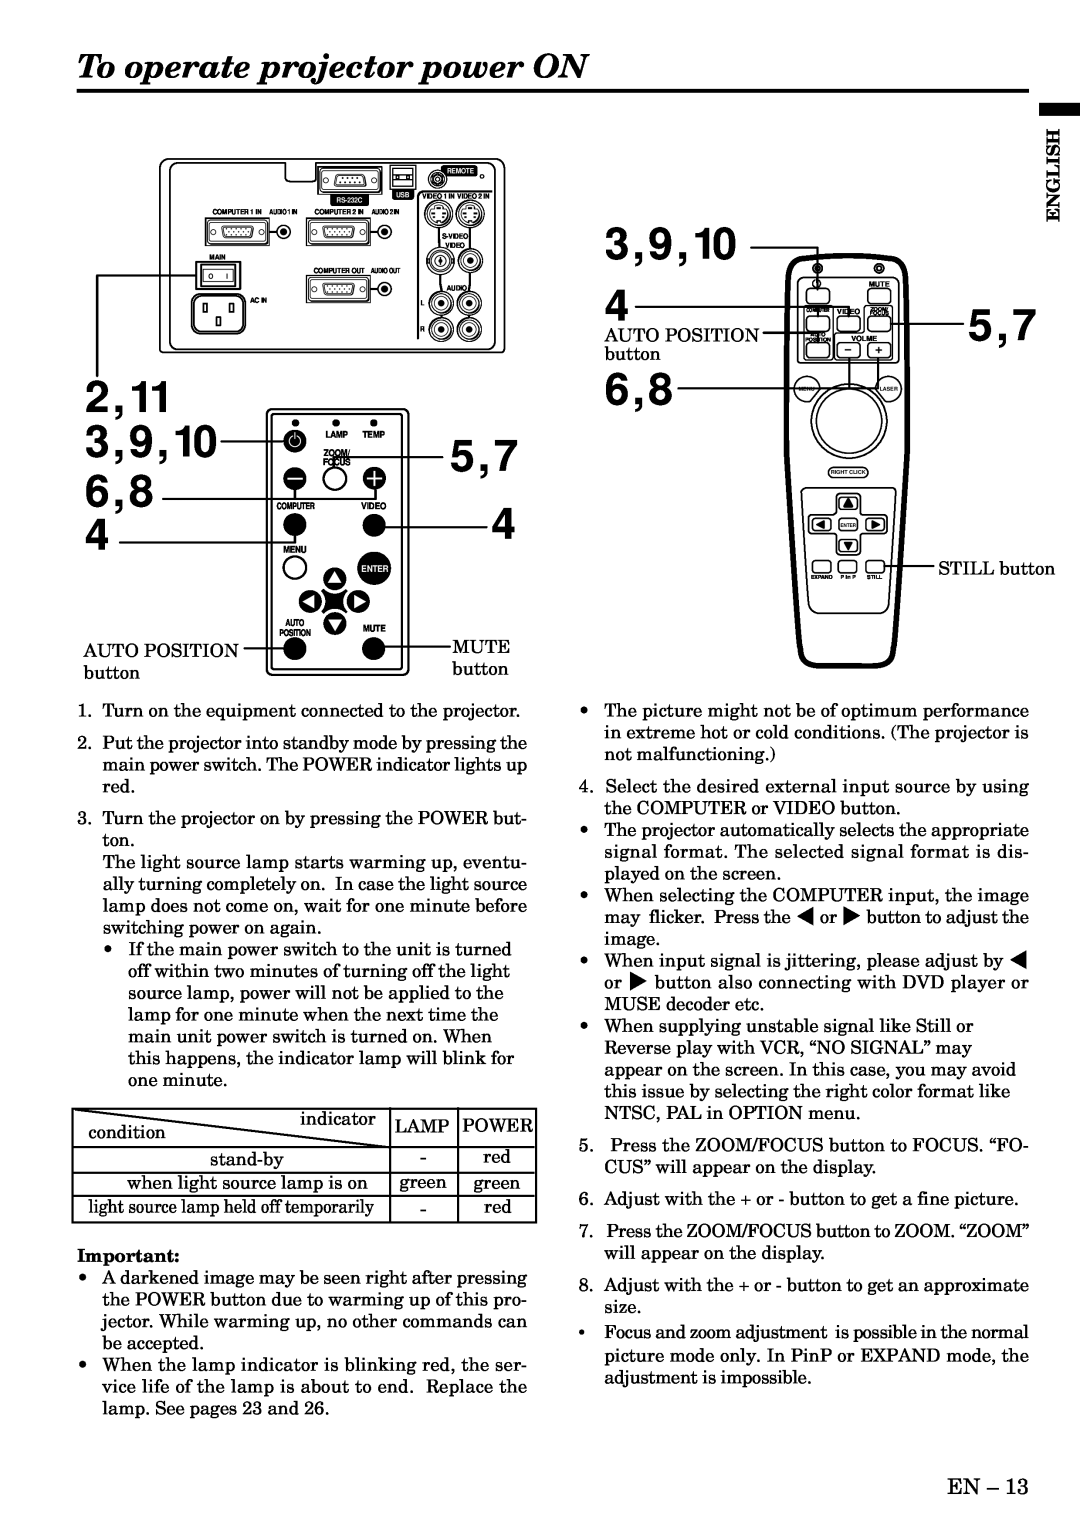 Mitsubishi Electronics S290U To operate projector power ON, 9,10, Enter, Remote, RS-232C, COMPUTER 1 IN AUDIO 1 IN, Video 